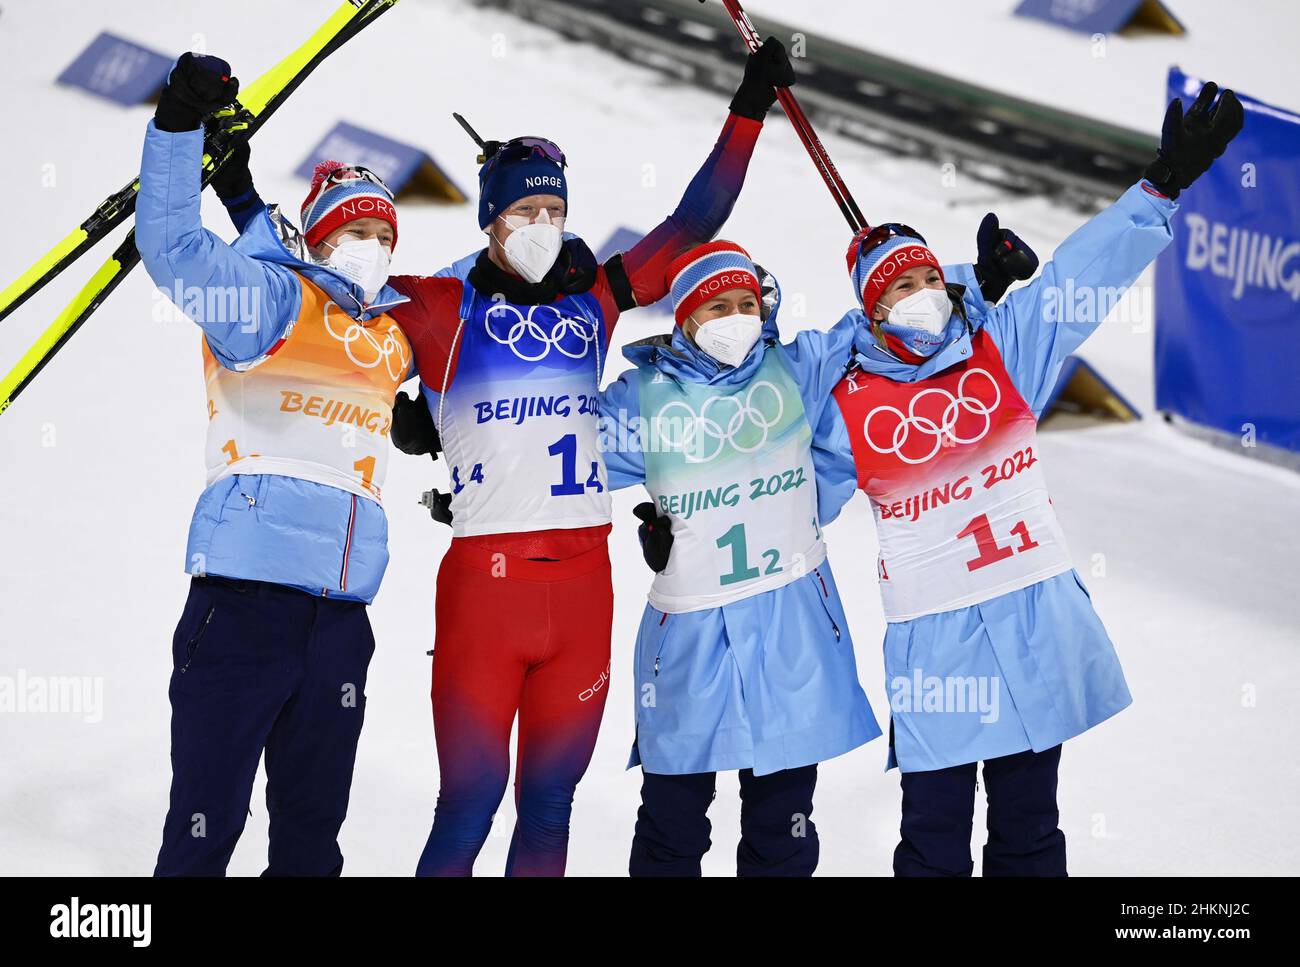 Beijing, China. 05th Feb, 2022. Norwegian biathletes celebrate after winning the 4x6-kilometer mixed relay at the Beijing Winter Olympics on Feb